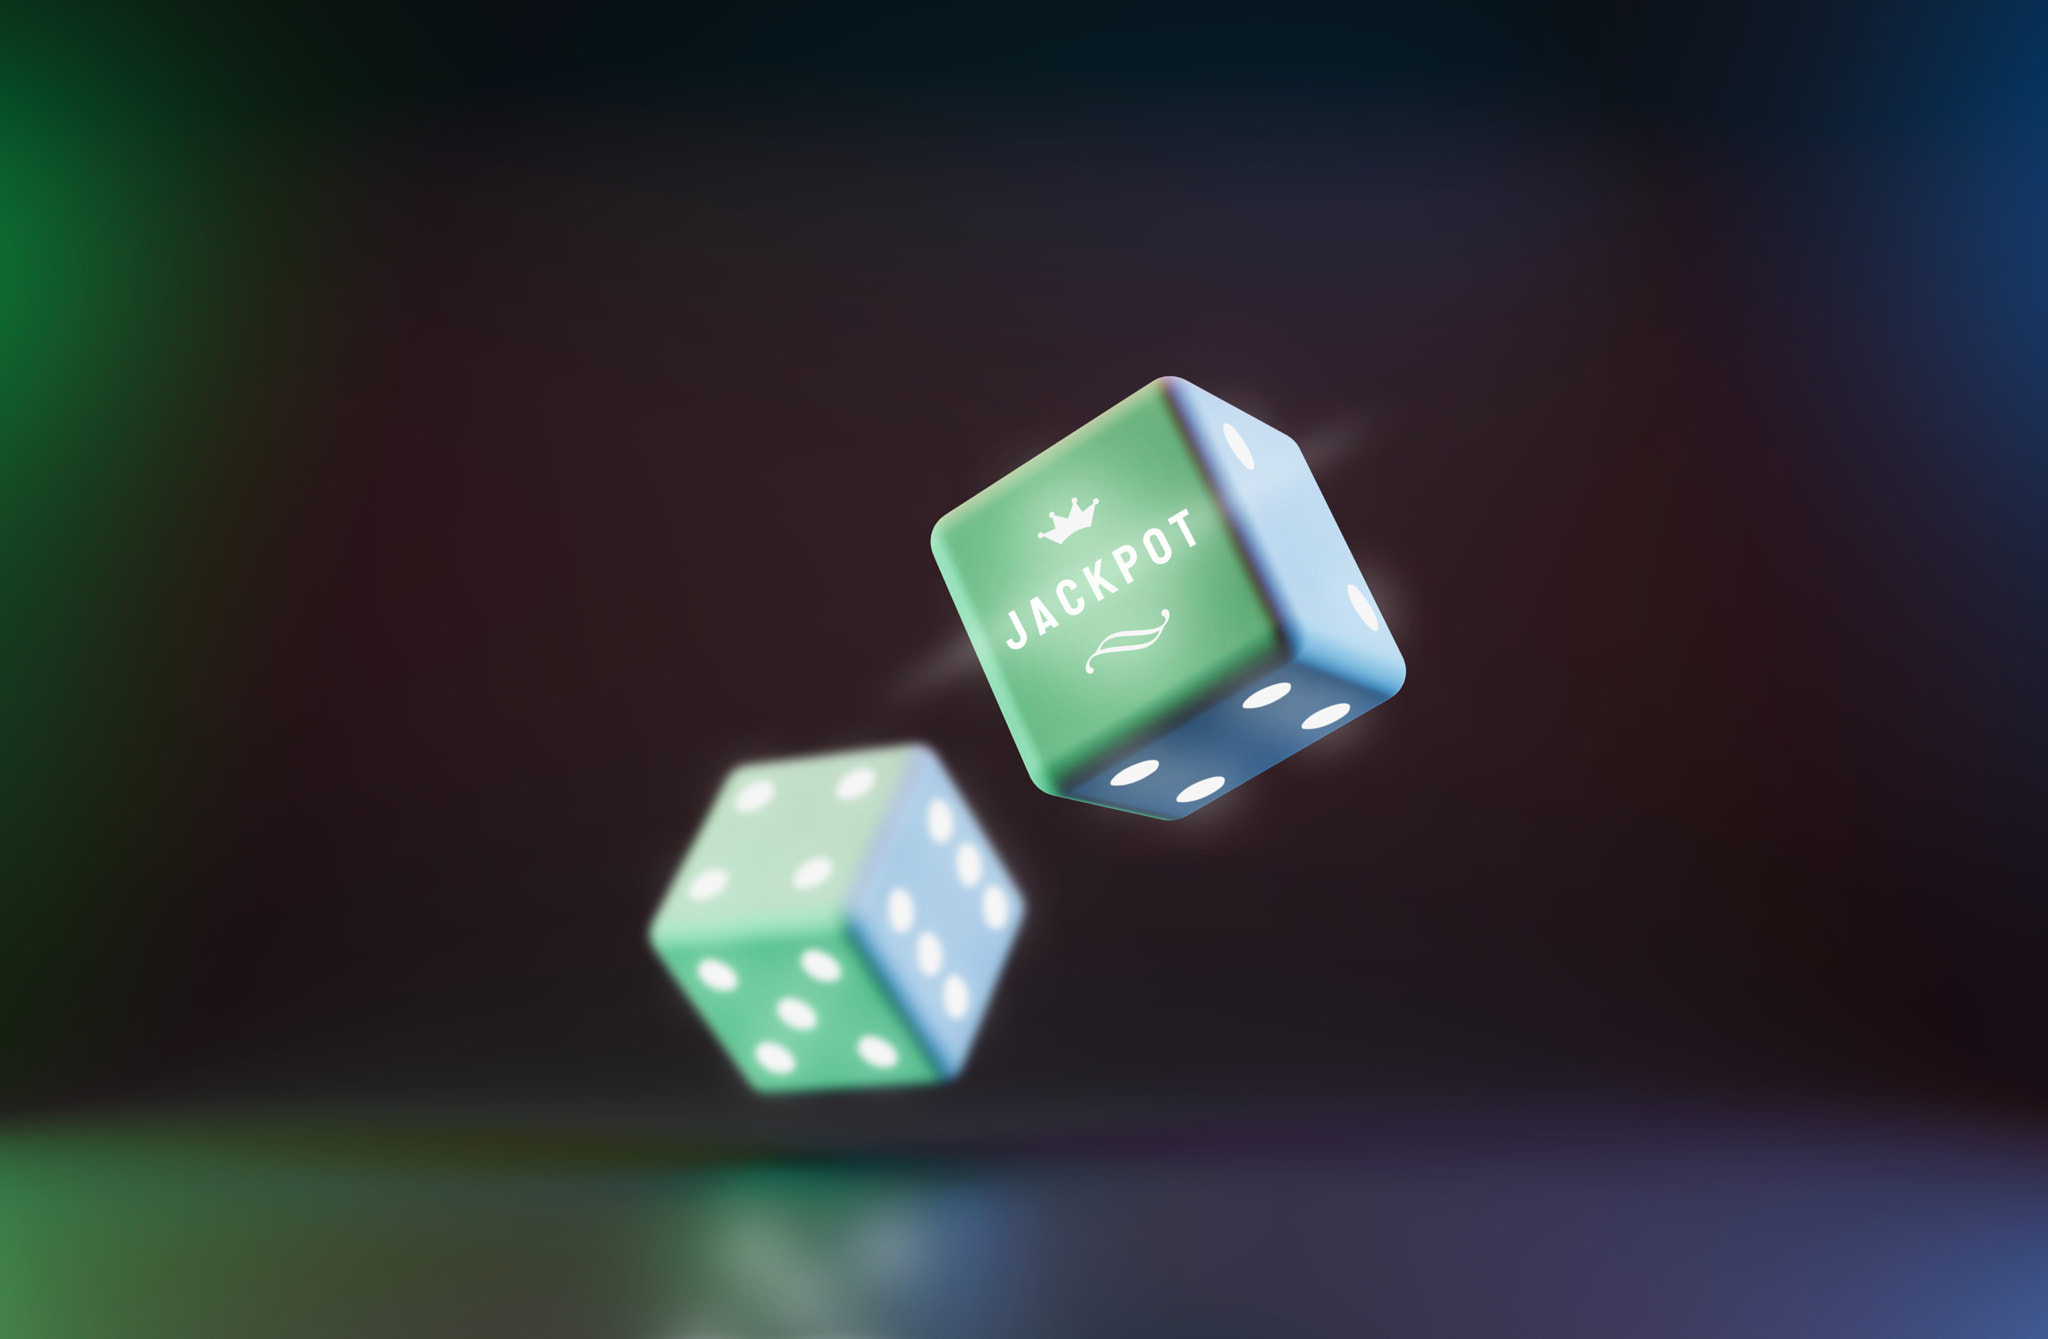 Casino rolling dice on gambling nightlife background with jackpot and lucky concept. Realistic 3D re